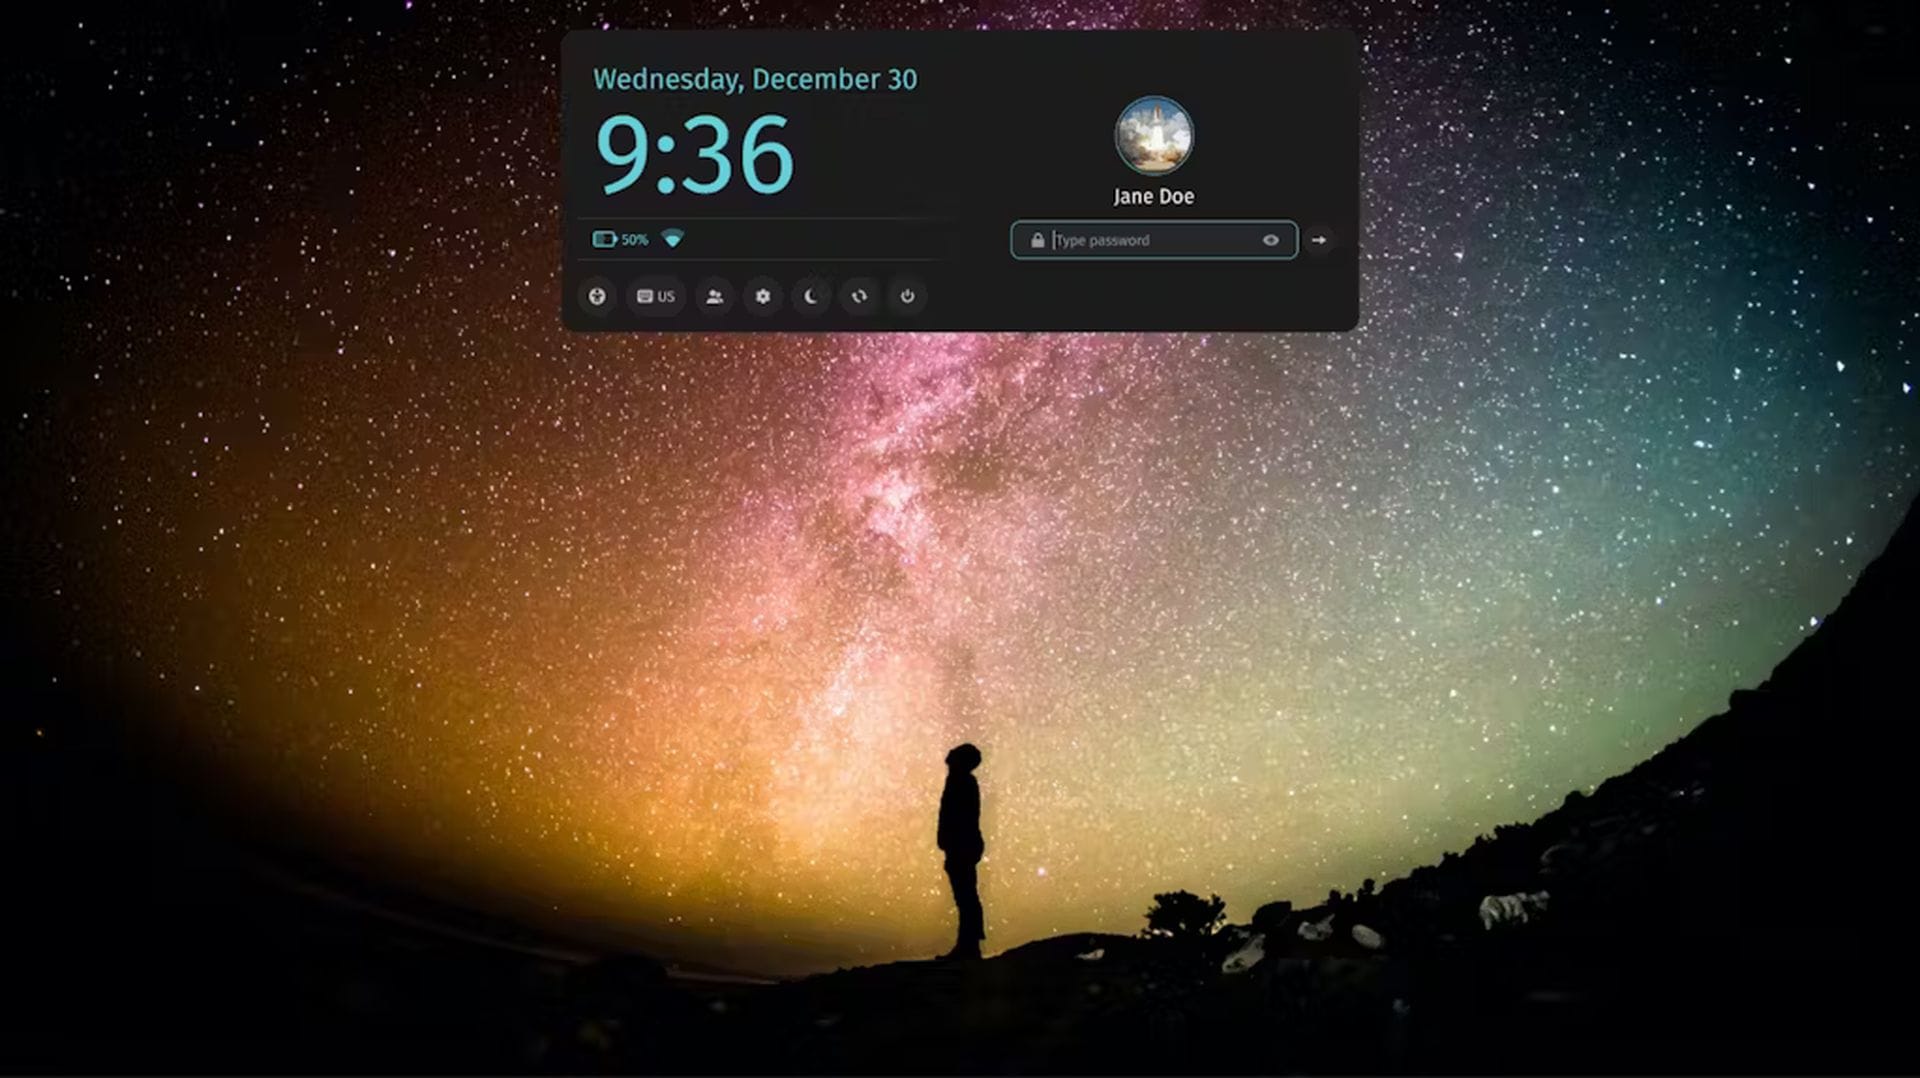 All About the Upcoming Pop!_OS COSMIC Desktop